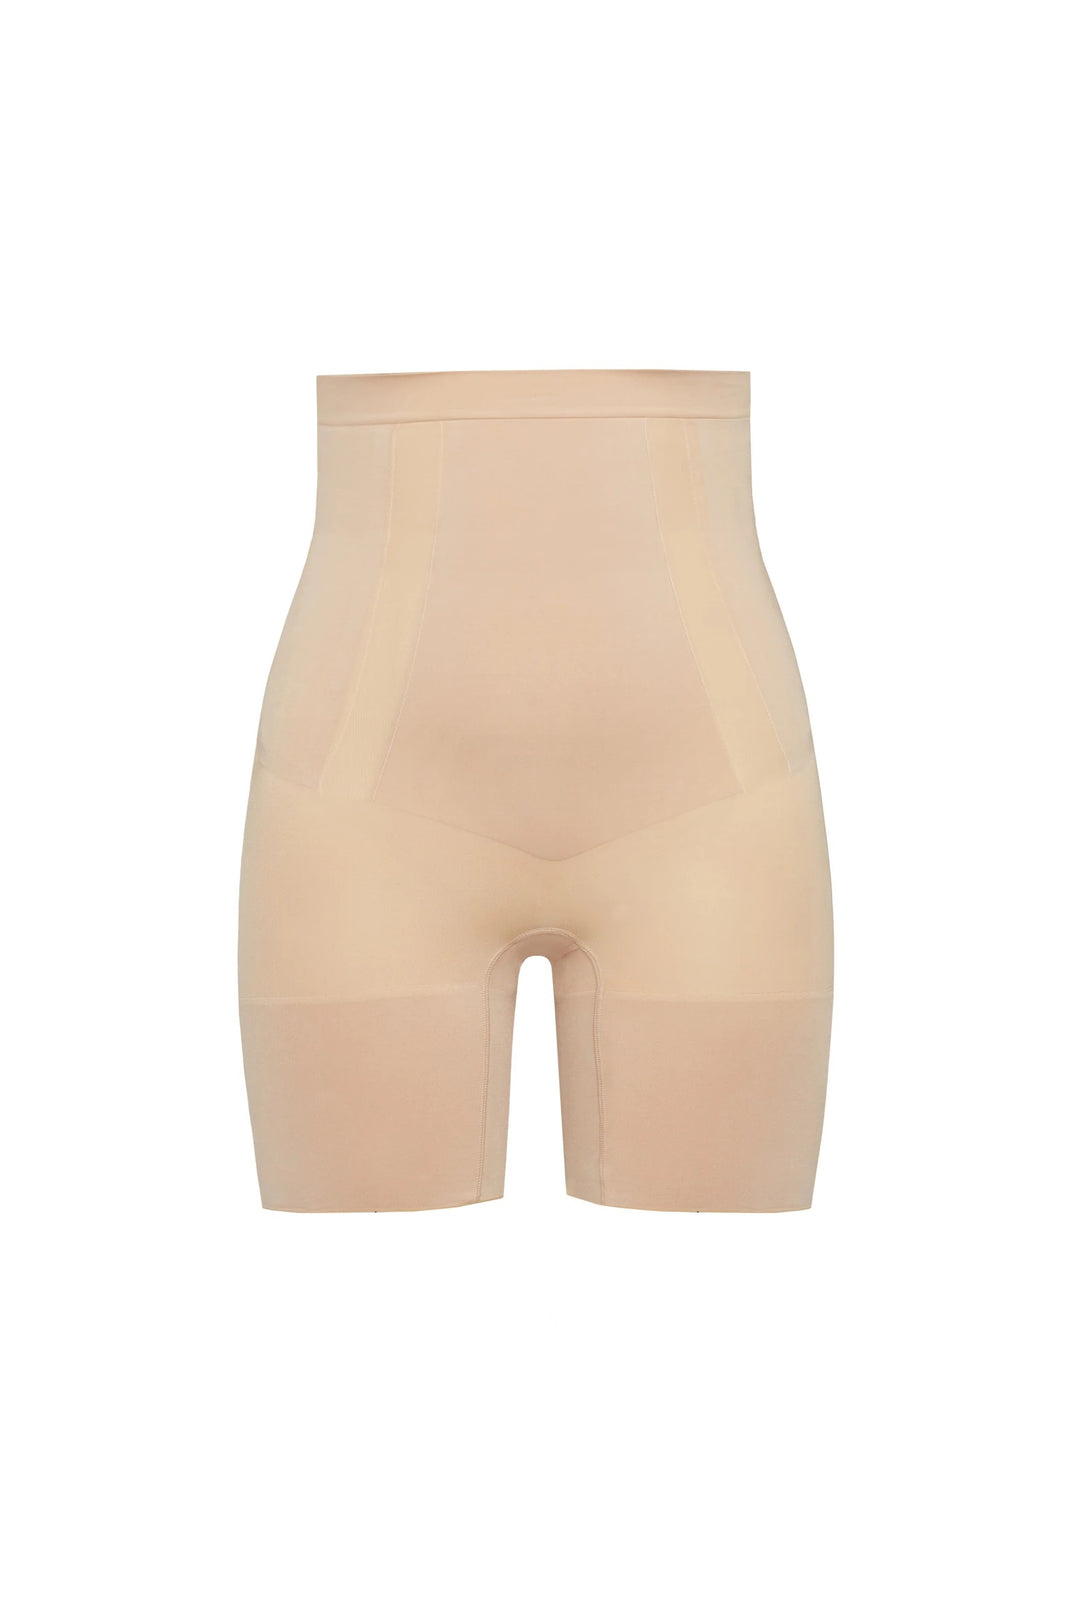 Spanx Thinstincts 2.0 High-Waisted Mid-Thigh Short - Underwear from   UK